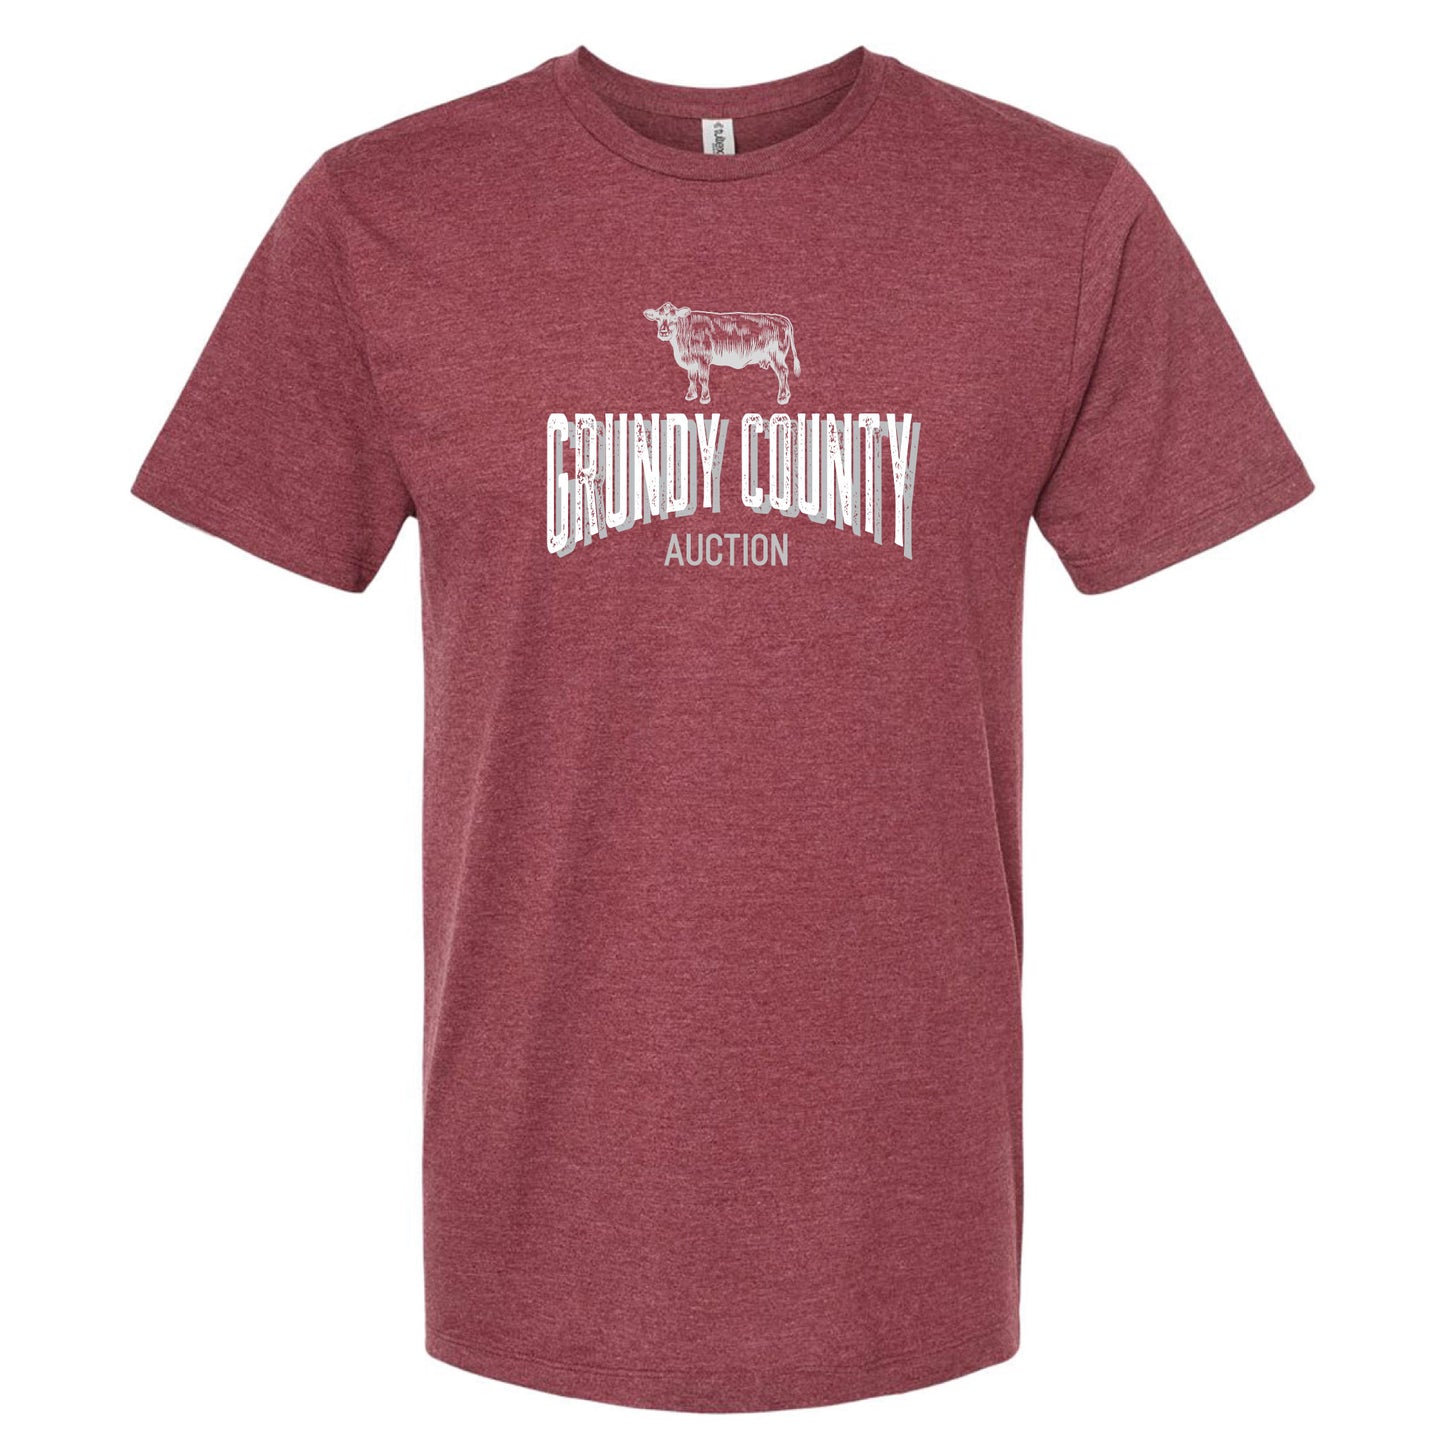 Grundy County Auction T-Shirt